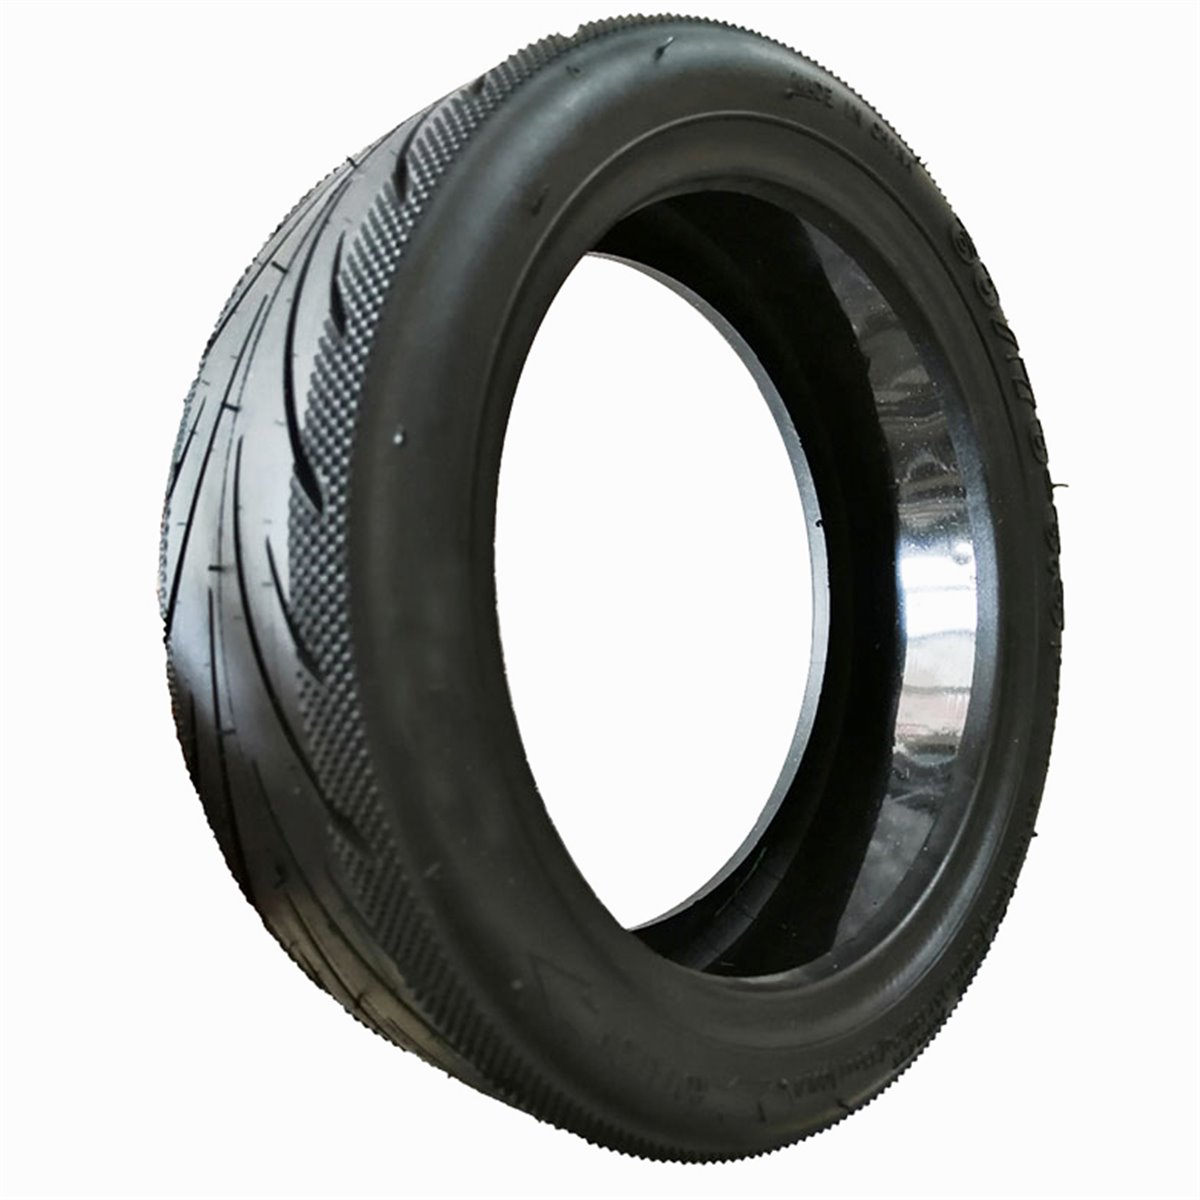 Segway Ninebot Max tubeless tyre with GEL (replacement)